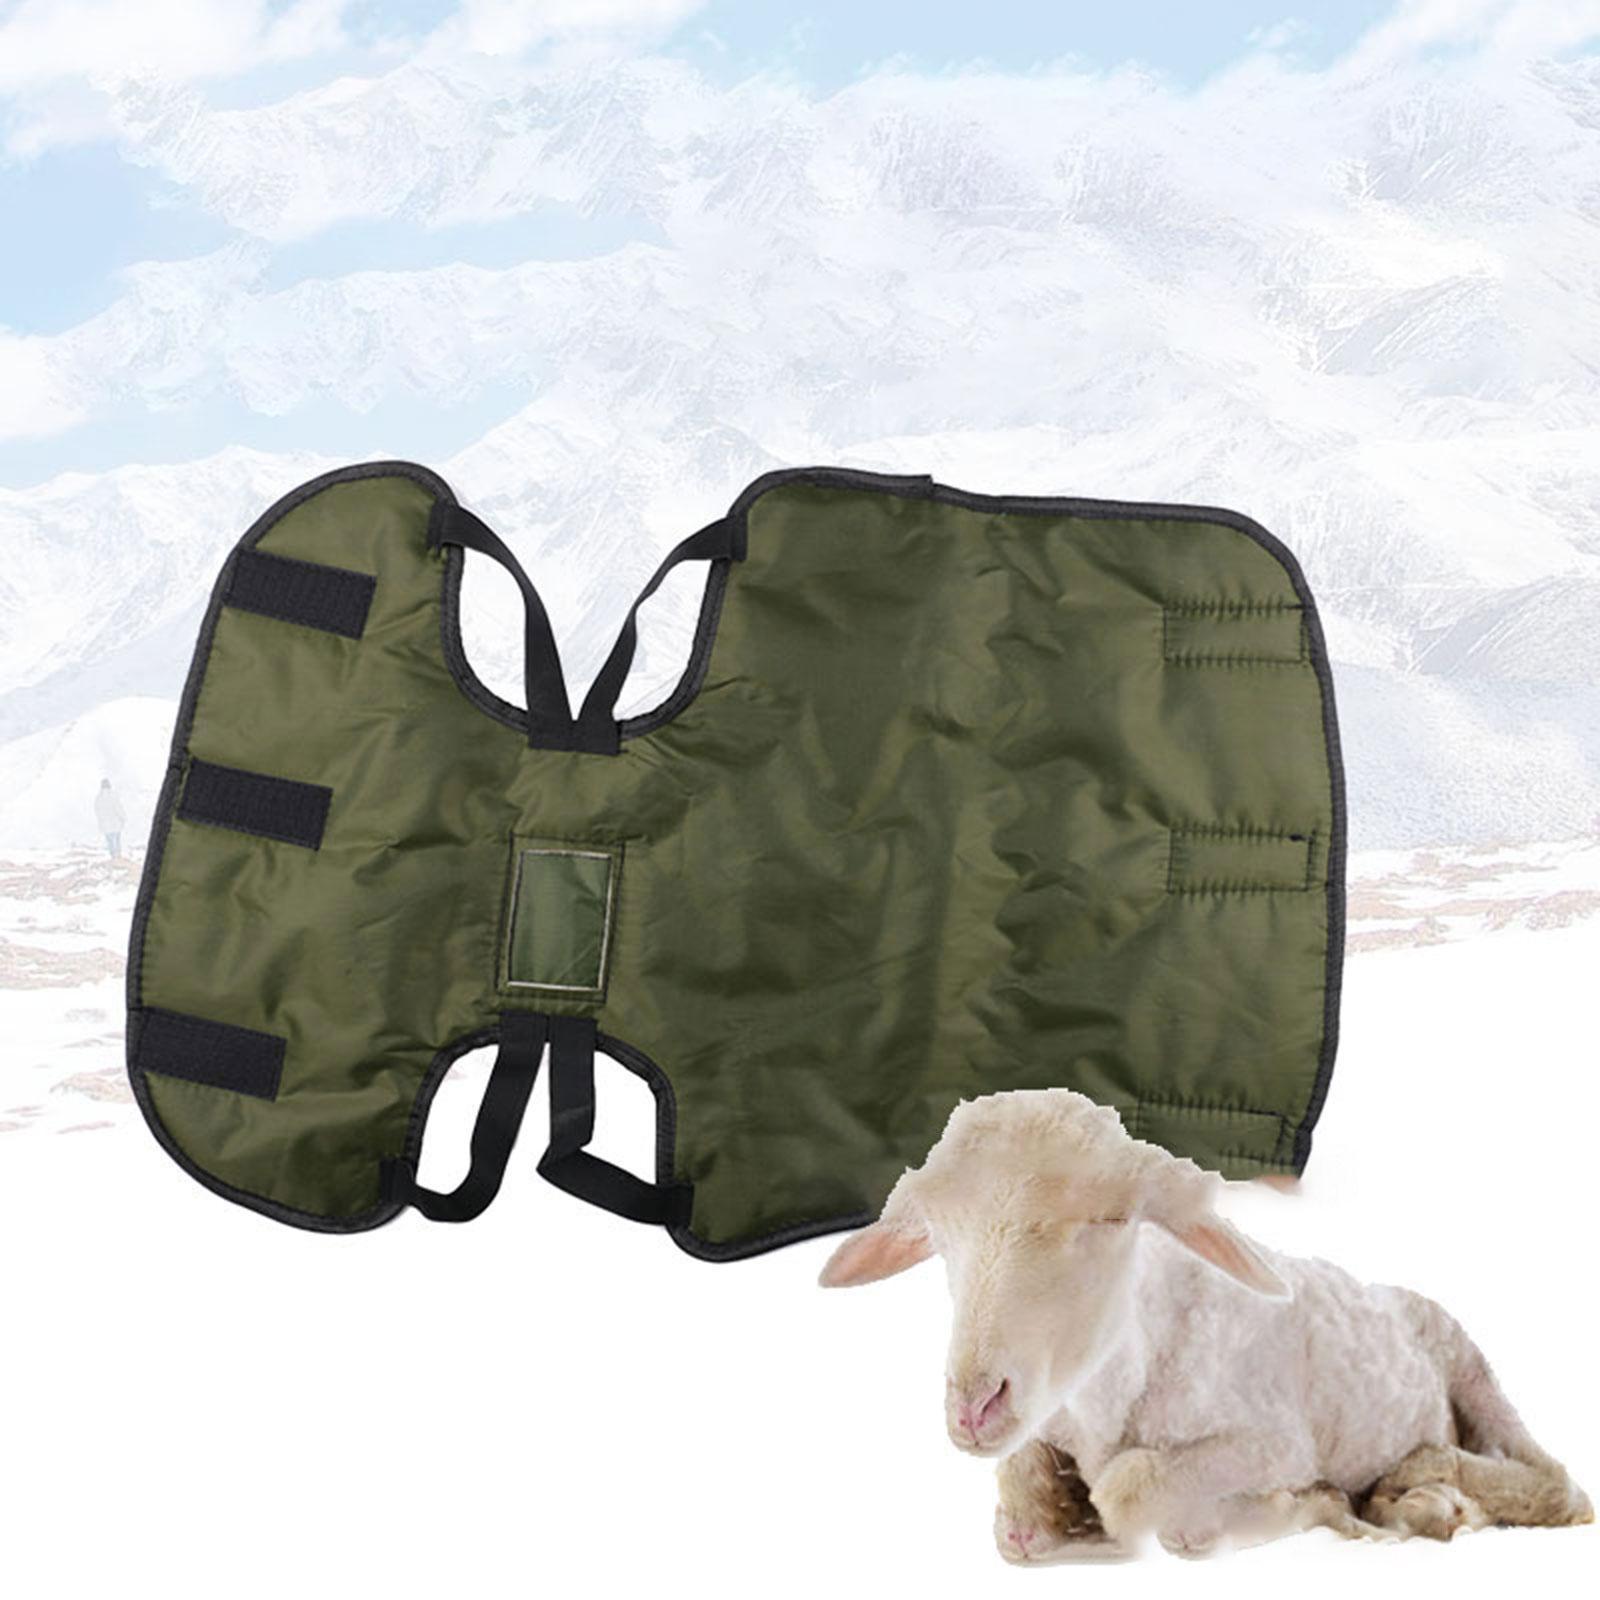 Cow Blanket Windproof Jacket Calf Warm Clothing for Pasture Livestock Sheep